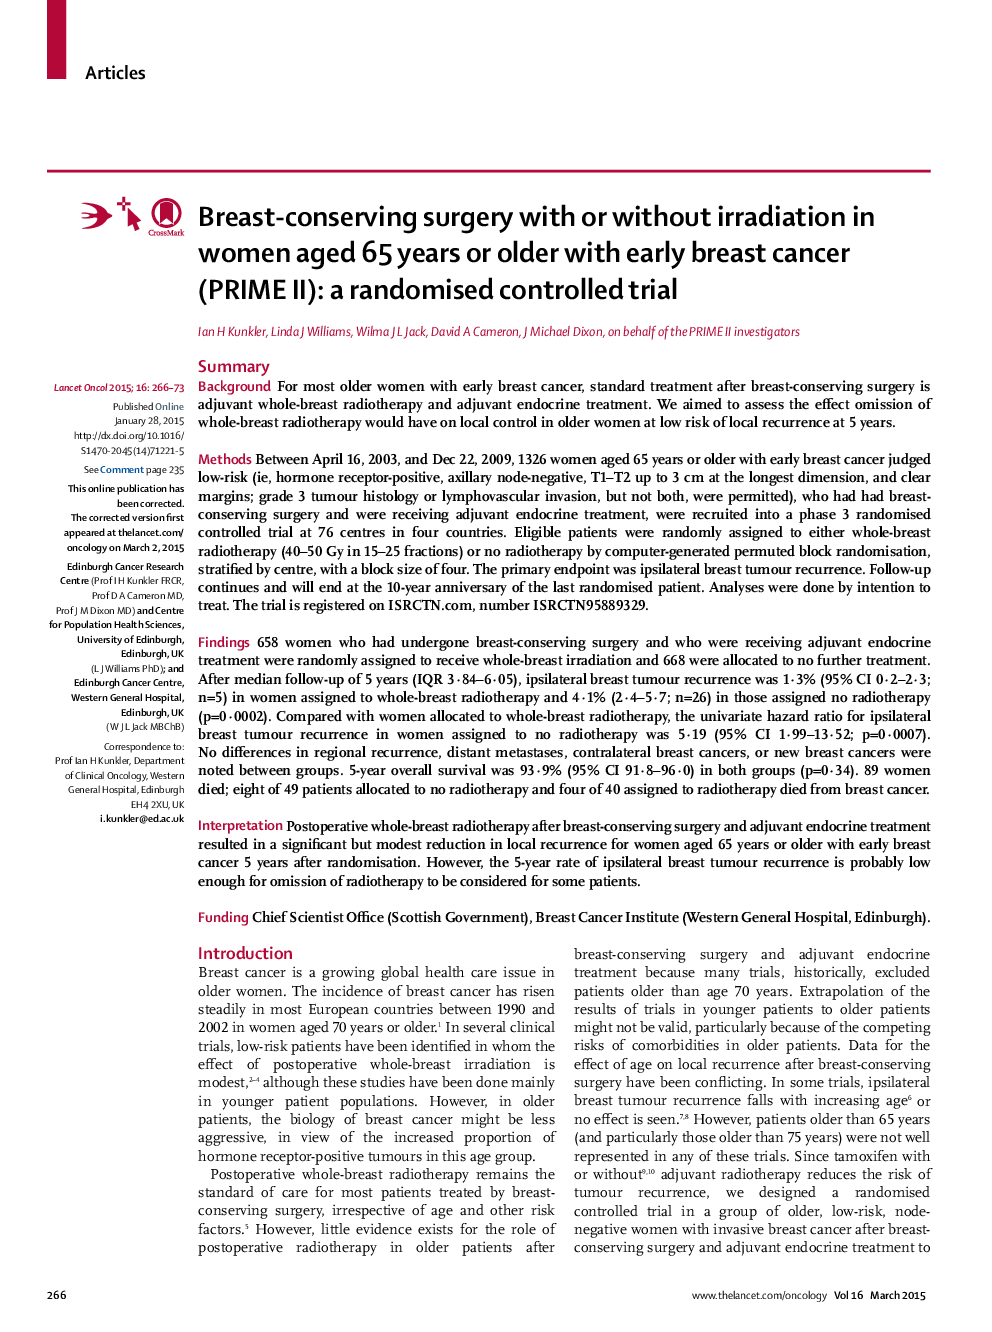 Breast-conserving surgery with or without irradiation in women aged 65 years or older with early breast cancer (PRIME II): a randomised controlled trial